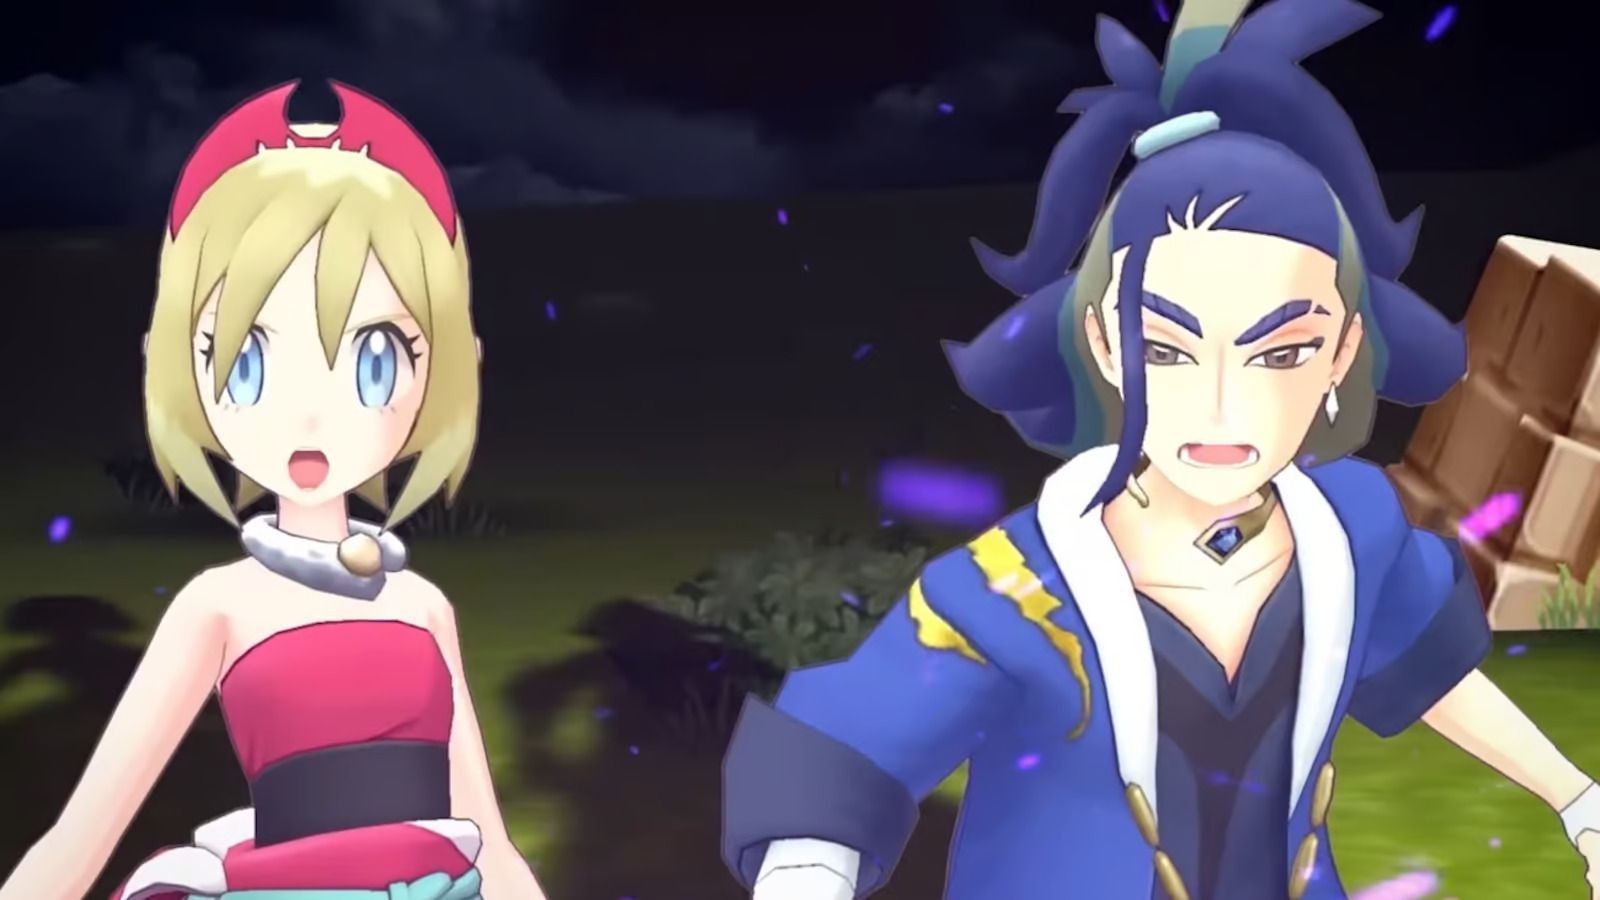 Irida and Adaman get ready for battle in Pokémon masters EX.